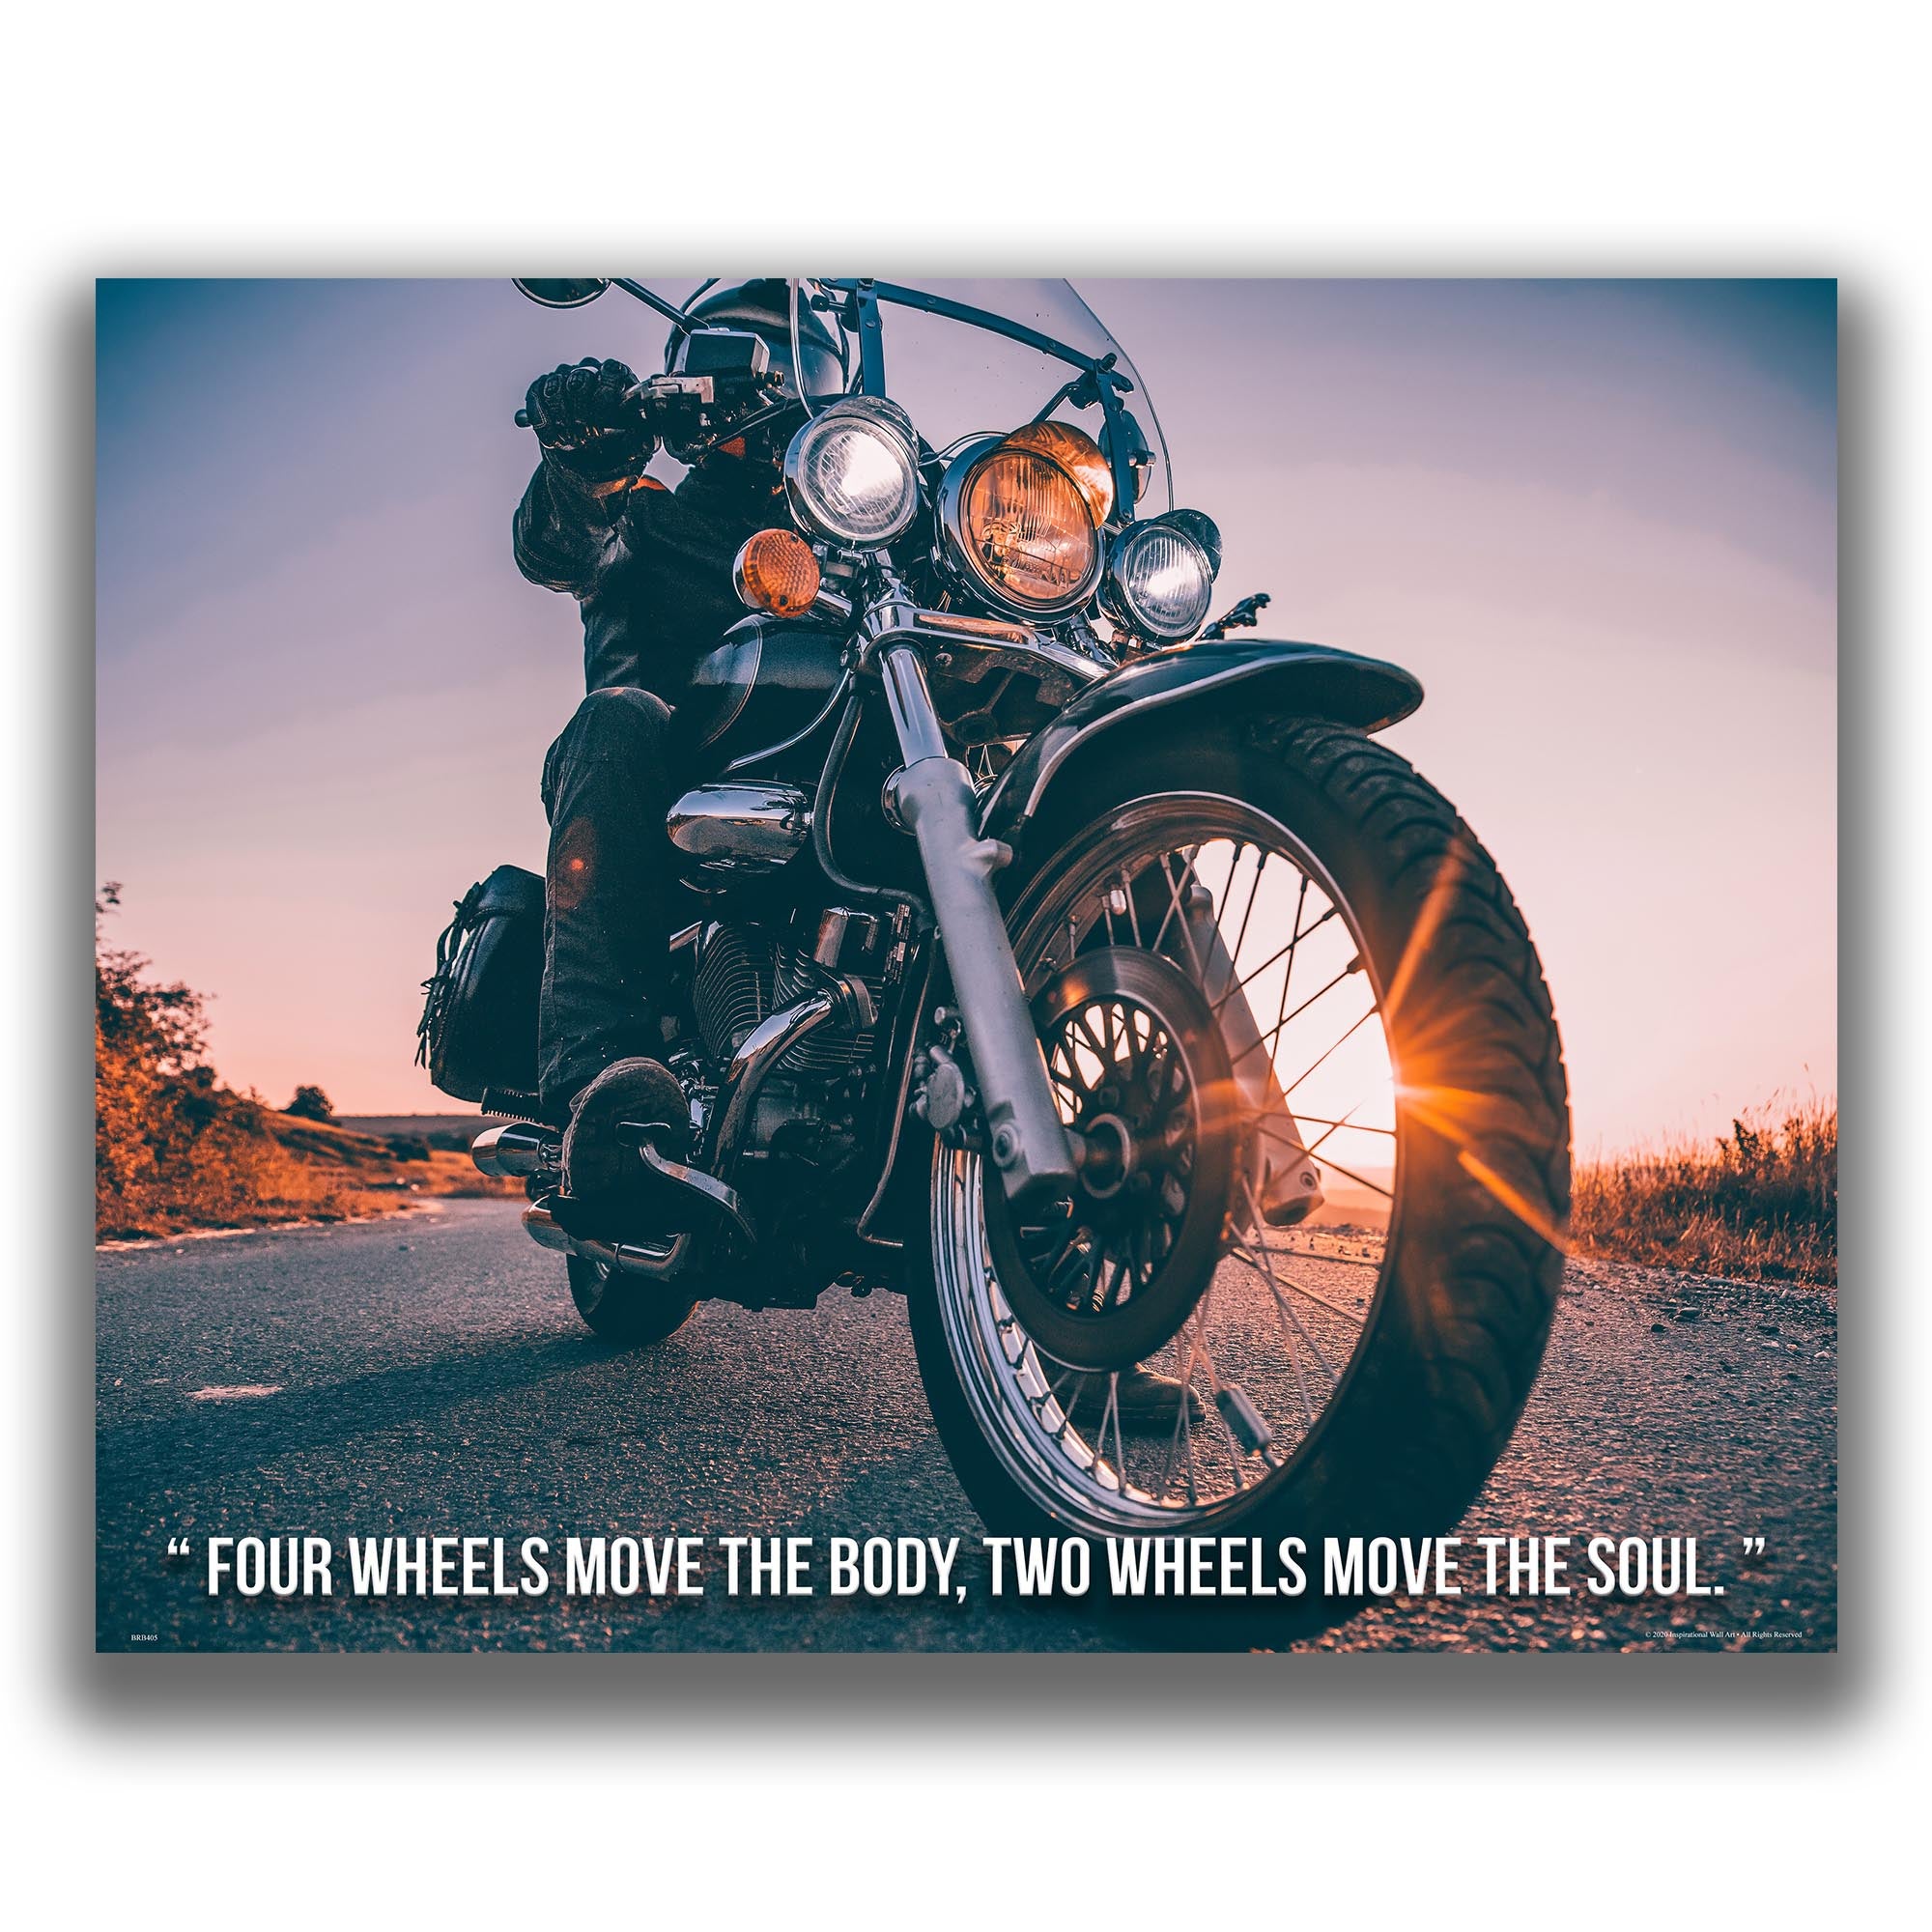 Four Wheels Move The Soul - Motorcycle Poster